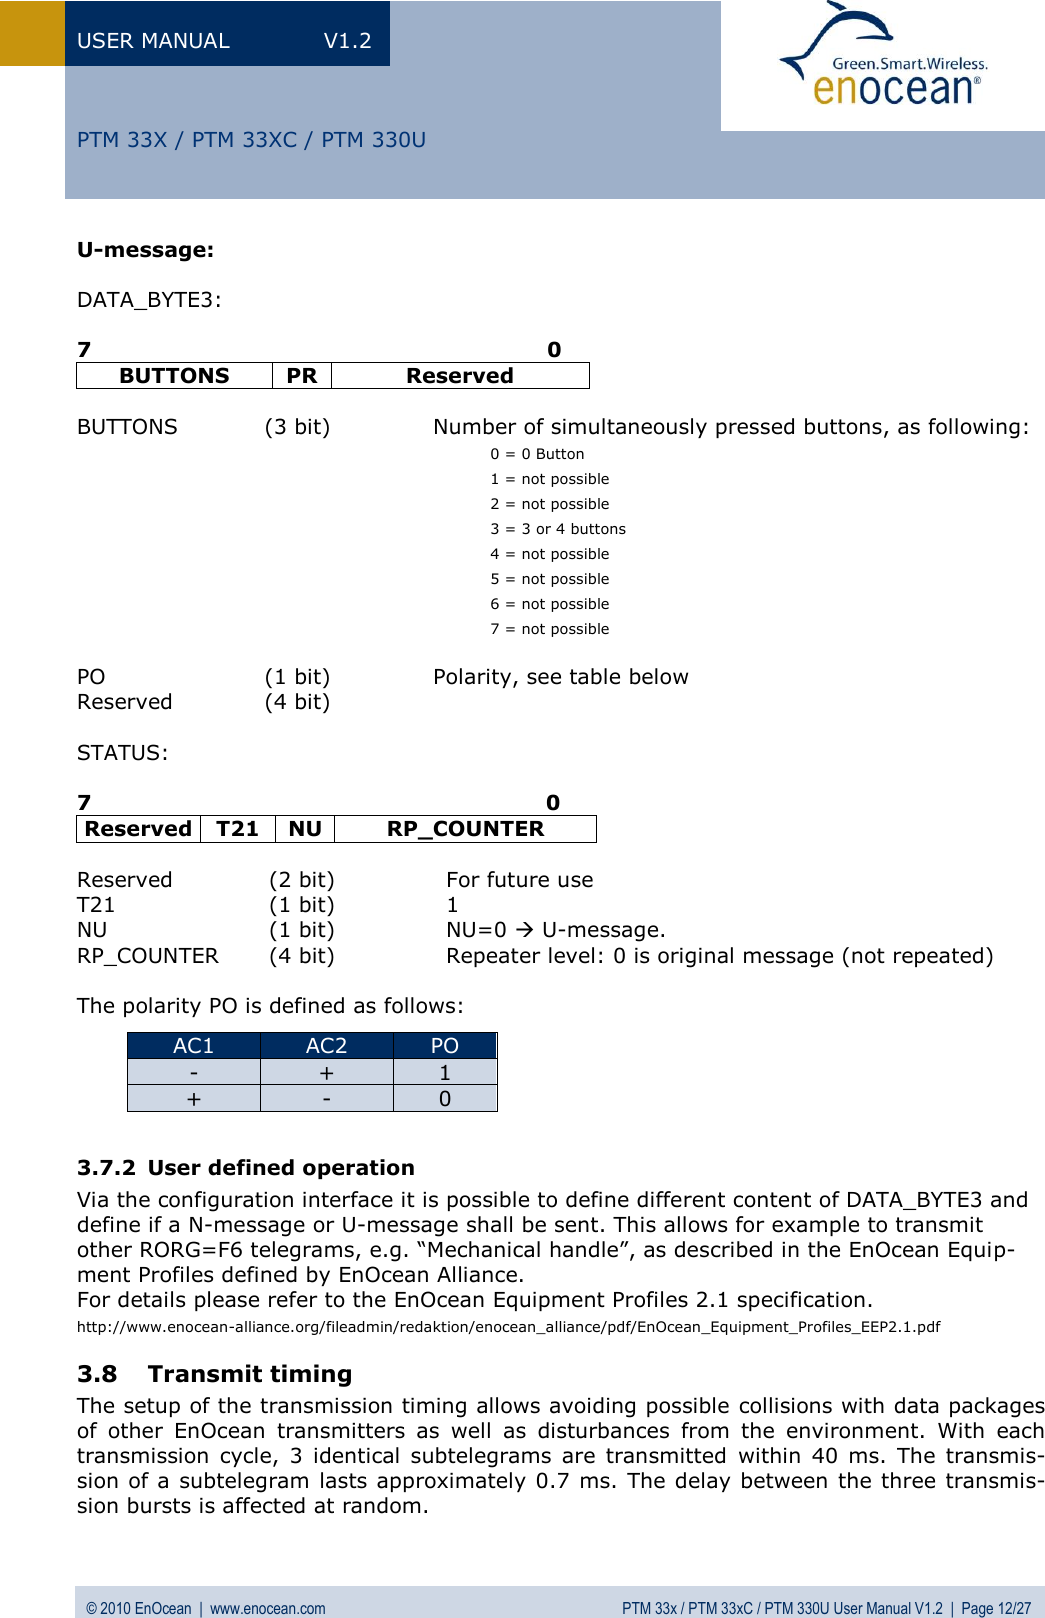 USER MANUAL  V1.2 © 2010 EnOcean  |  www.enocean.com  PTM 33x / PTM 33xC / PTM 330U User Manual V1.2  |  Page 12/27   PTM 33X / PTM 33XC / PTM 330U U-message:  DATA_BYTE3:  7                                                                0 BUTTONS PR Reserved  BUTTONS  (3 bit)   Number of simultaneously pressed buttons, as following: 0 = 0 Button 1 = not possible 2 = not possible 3 = 3 or 4 buttons 4 = not possible 5 = not possible 6 = not possible 7 = not possible  PO  (1 bit)   Polarity, see table below Reserved  (4 bit)     STATUS:  7                                                                0 Reserved T21 NU RP_COUNTER  Reserved  (2 bit)   For future use T21  (1 bit)  1 NU  (1 bit)  NU=0  U-message. RP_COUNTER  (4 bit)  Repeater level: 0 is original message (not repeated)  The polarity PO is defined as follows:         3.7.2 User defined operation Via the configuration interface it is possible to define different content of DATA_BYTE3 and define if a N-message or U-message shall be sent. This allows for example to transmit other RORG=F6 telegrams, e.g. “Mechanical handle”, as described in the EnOcean Equip-ment Profiles defined by EnOcean Alliance.  For details please refer to the EnOcean Equipment Profiles 2.1 specification. http://www.enocean-alliance.org/fileadmin/redaktion/enocean_alliance/pdf/EnOcean_Equipment_Profiles_EEP2.1.pdf 3.8 Transmit timing  The setup of the transmission timing allows avoiding possible collisions with data packages of  other  EnOcean  transmitters  as  well  as  disturbances  from  the  environment.  With  each transmission  cycle,  3  identical  subtelegrams  are  transmitted  within  40  ms.  The  transmis-sion of a subtelegram lasts approximately 0.7 ms.  The delay between the three transmis-sion bursts is affected at random. AC1 AC2 PO - + 1 + - 0 